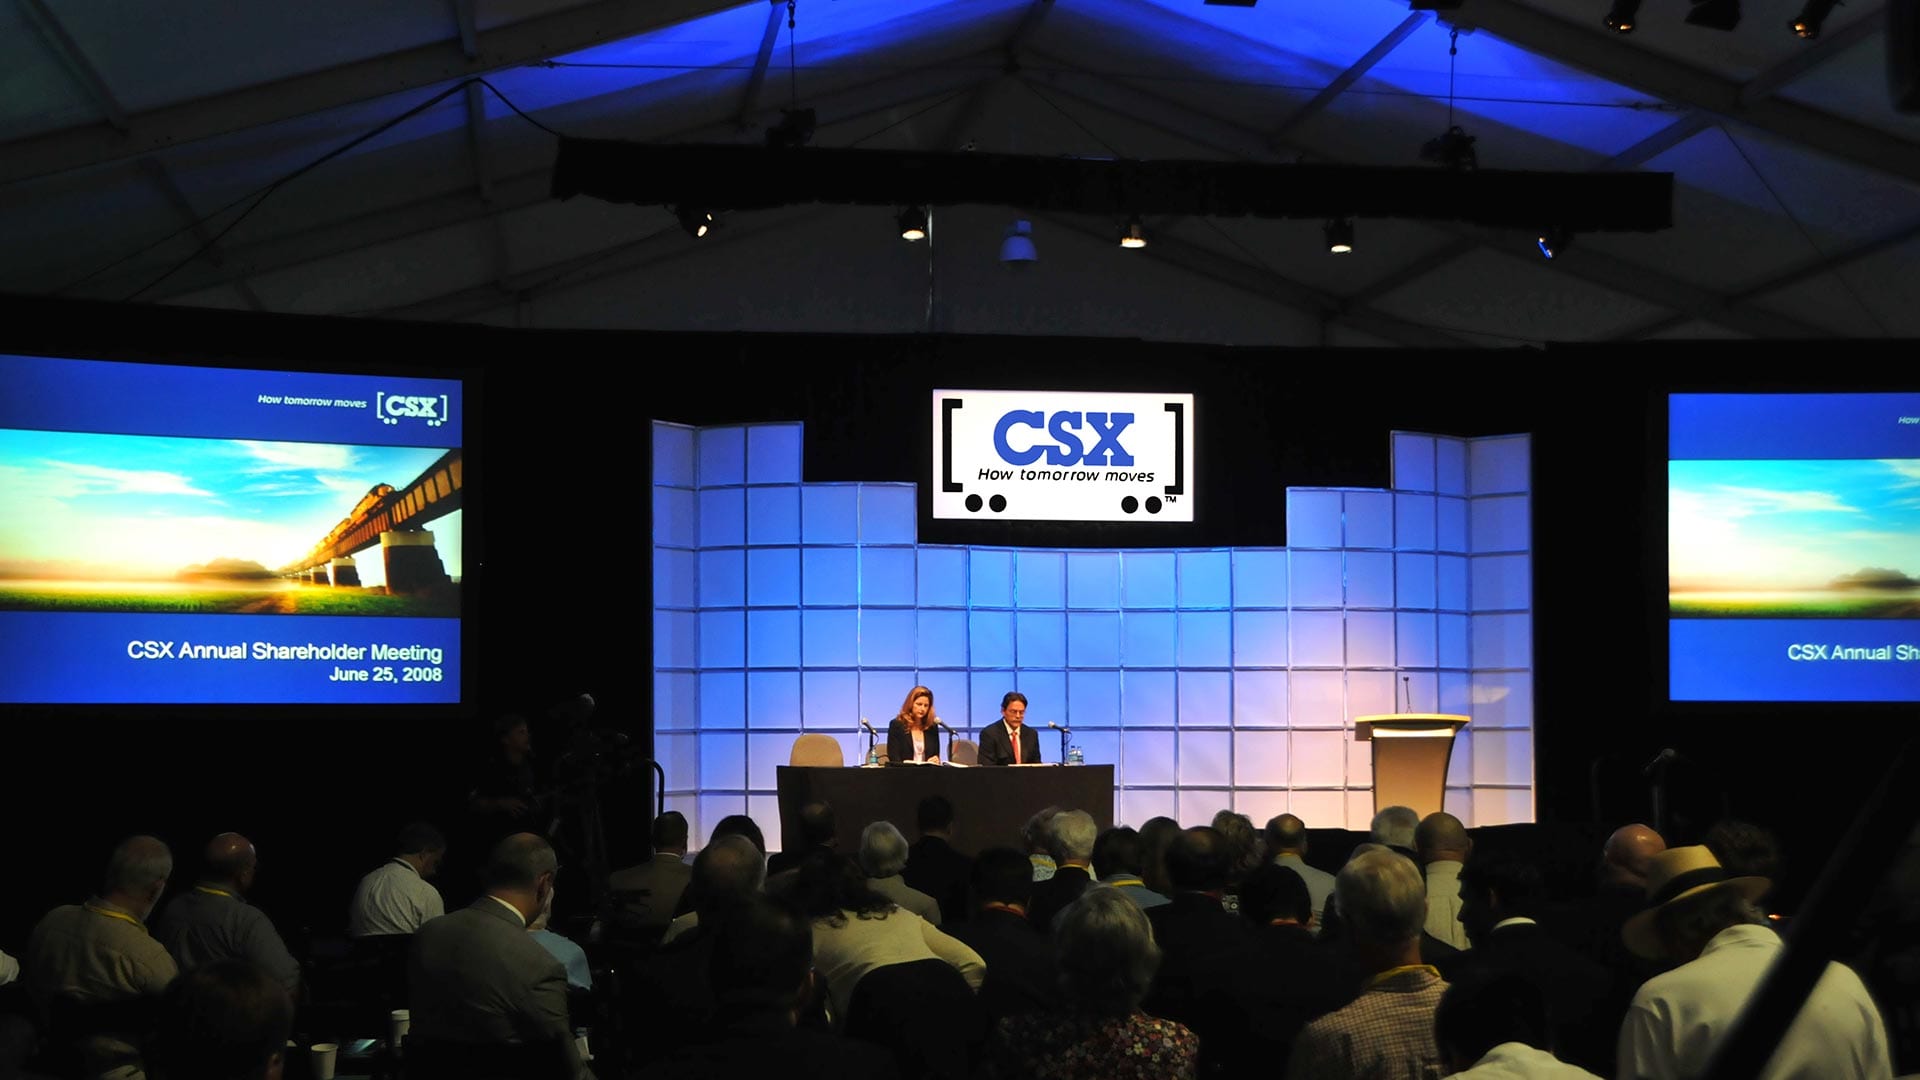 csx-panel-discussion-annual-shareholders-meeting